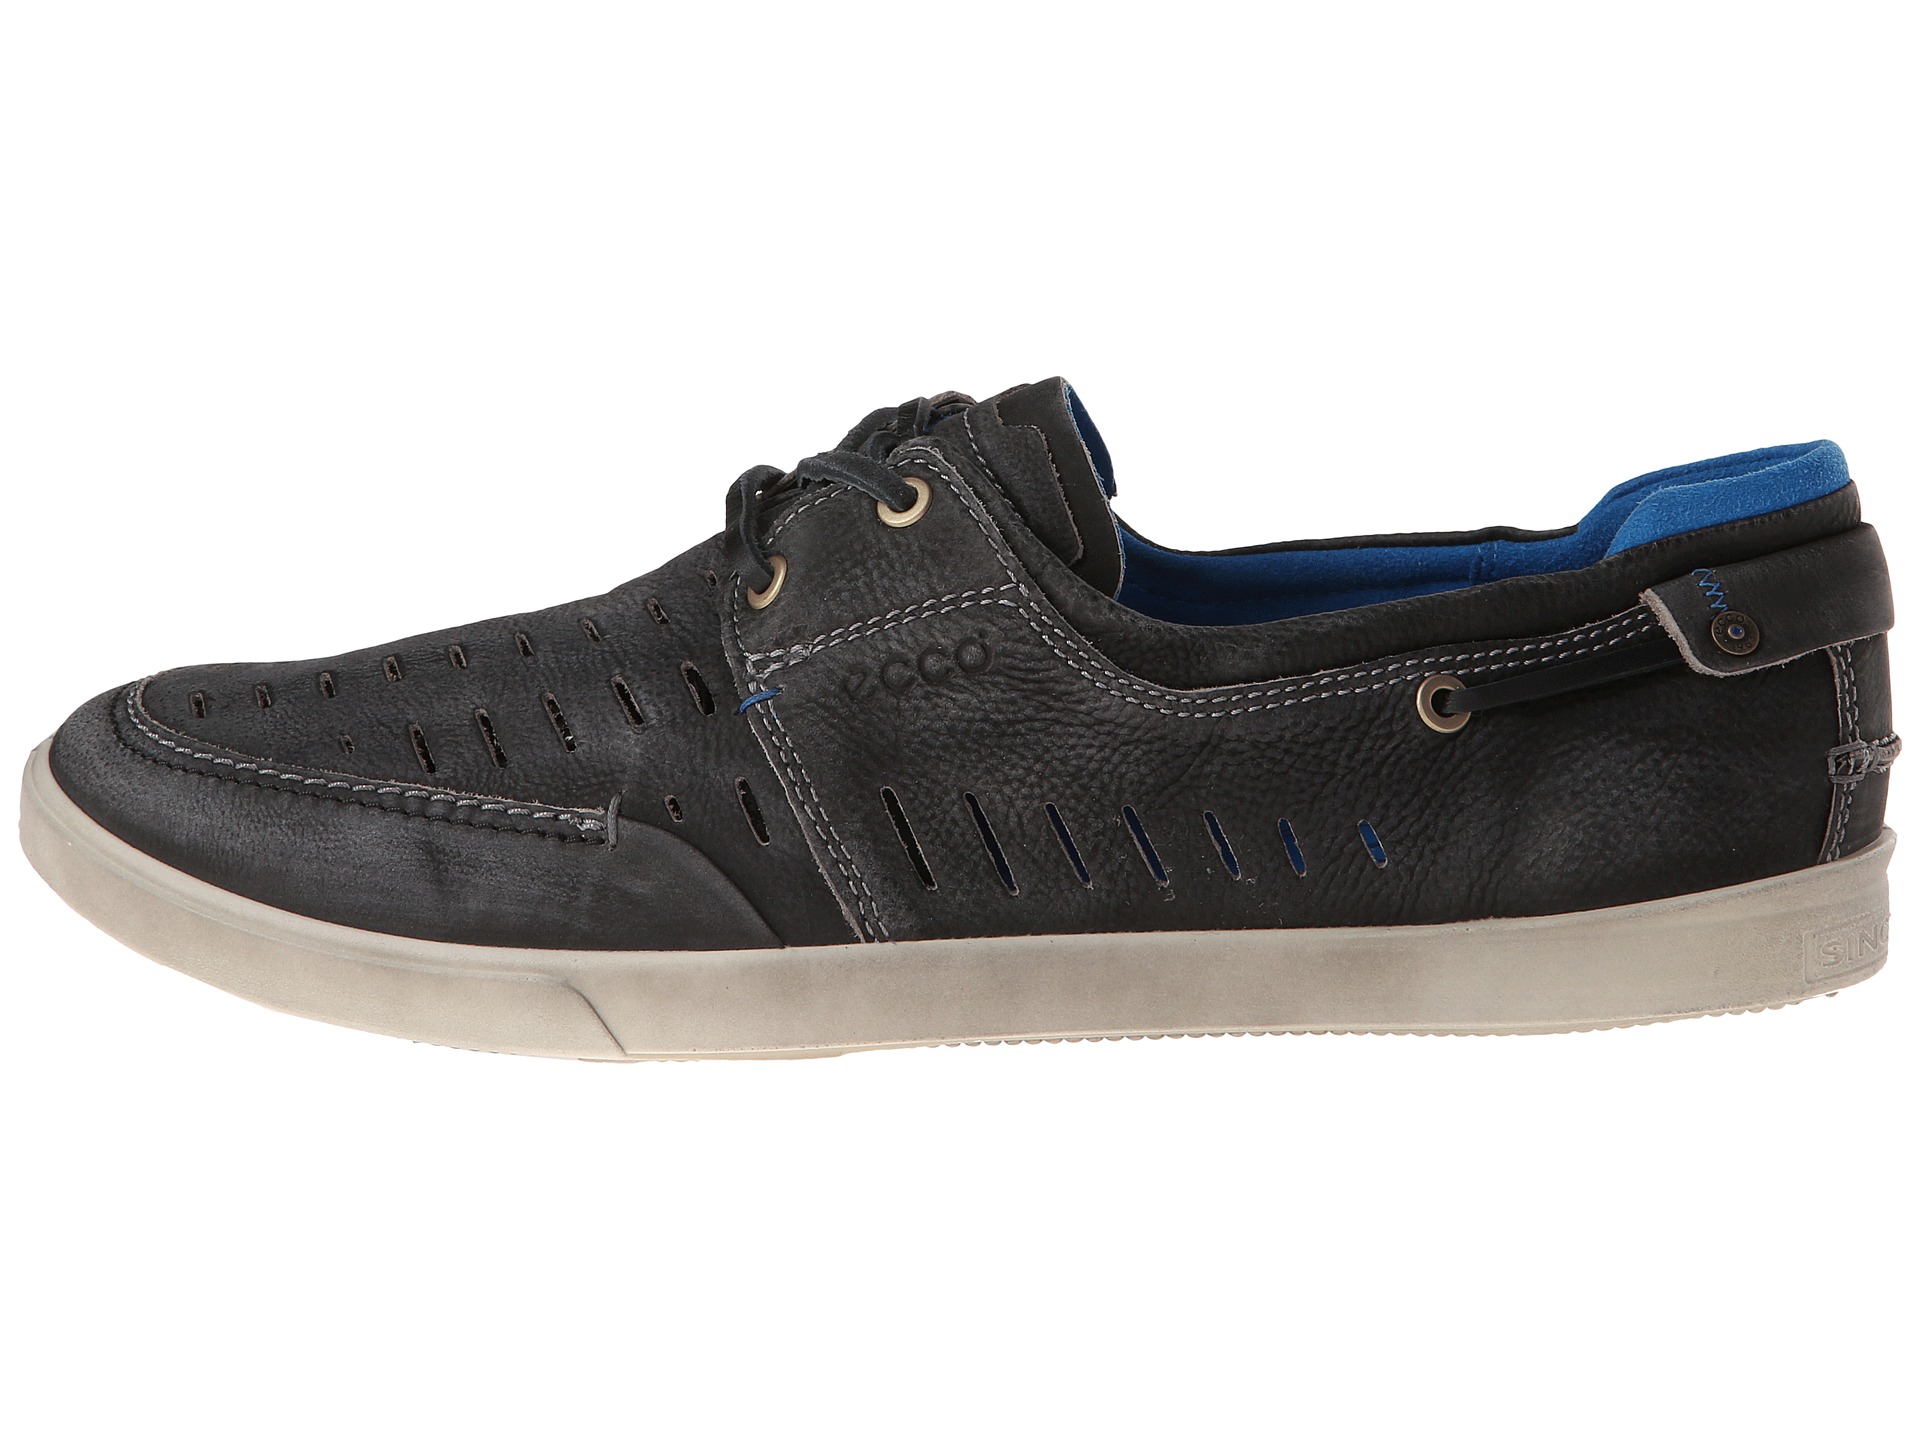 Ecco Collin Trend Boat Shoe, Shoes | Shipped Free at Zappos